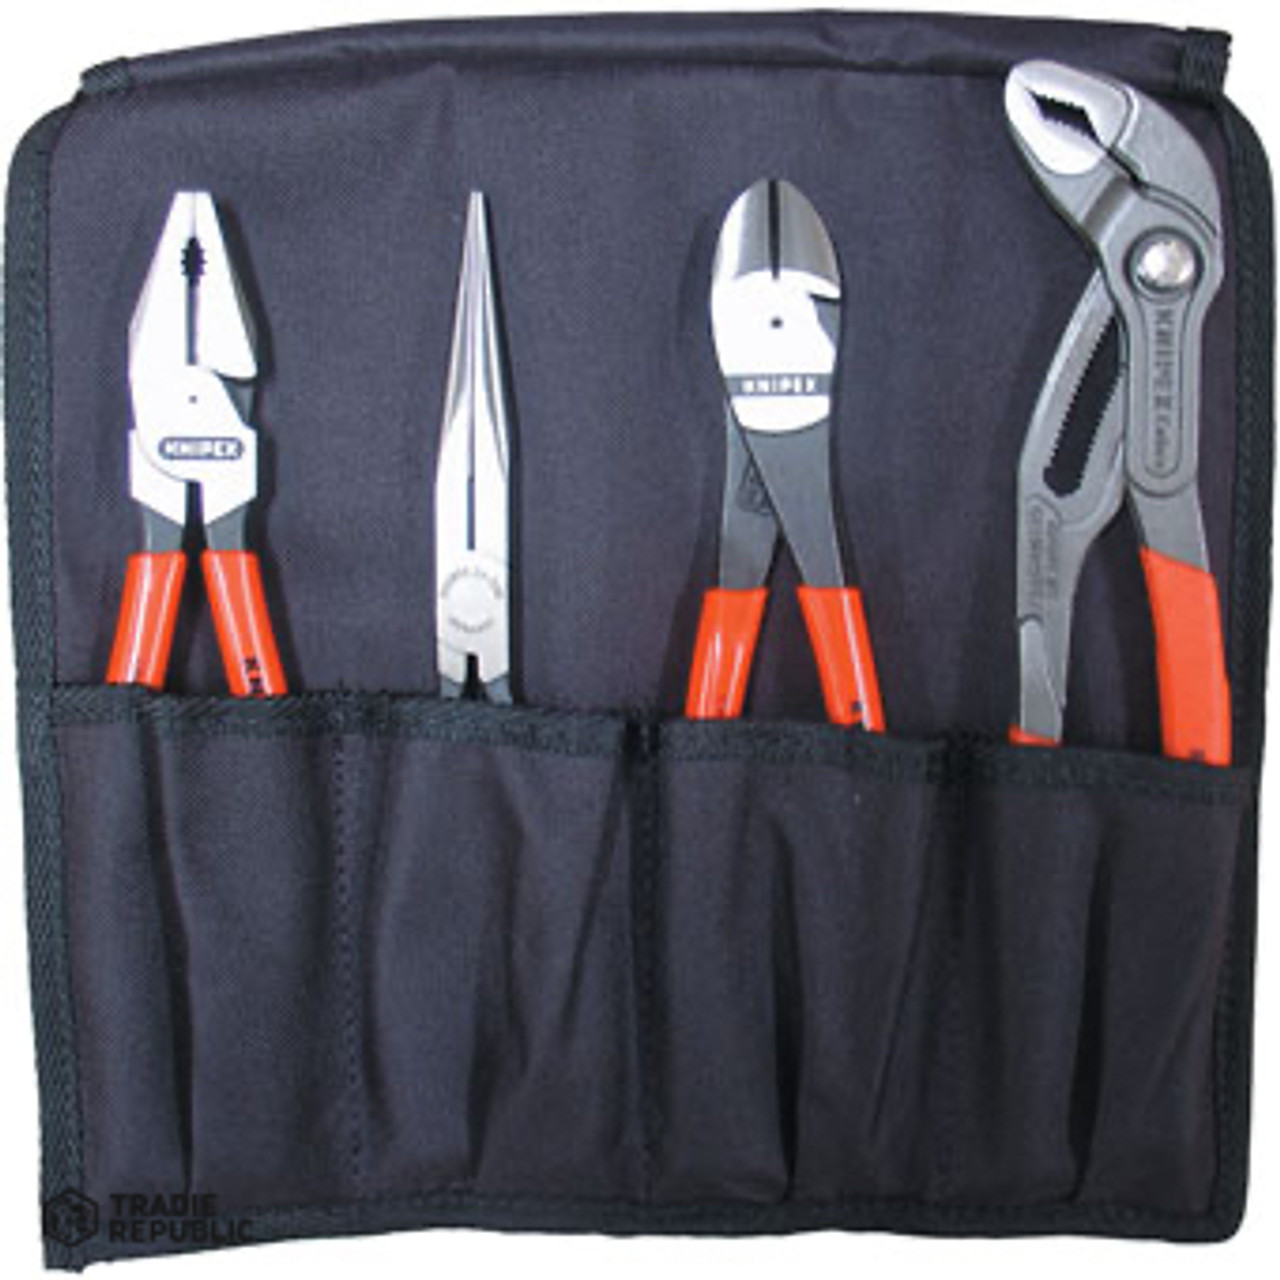 002008 Knipex Pliers Set 4pc - Top Seller